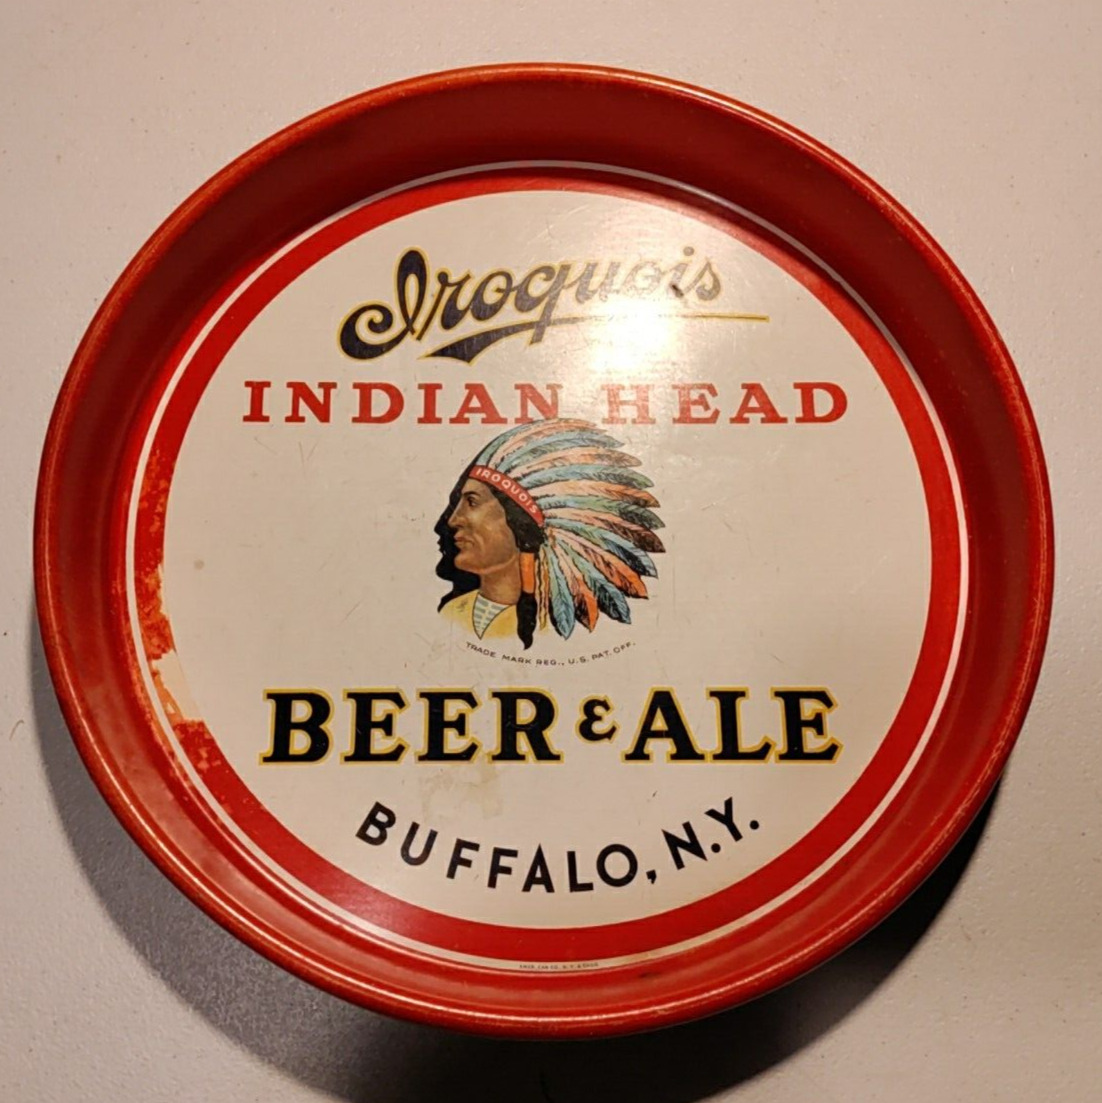 Vintage Iroquois Indian Head Beer & Ale Tray,Buffalo,N.Y., Amer Can Co.